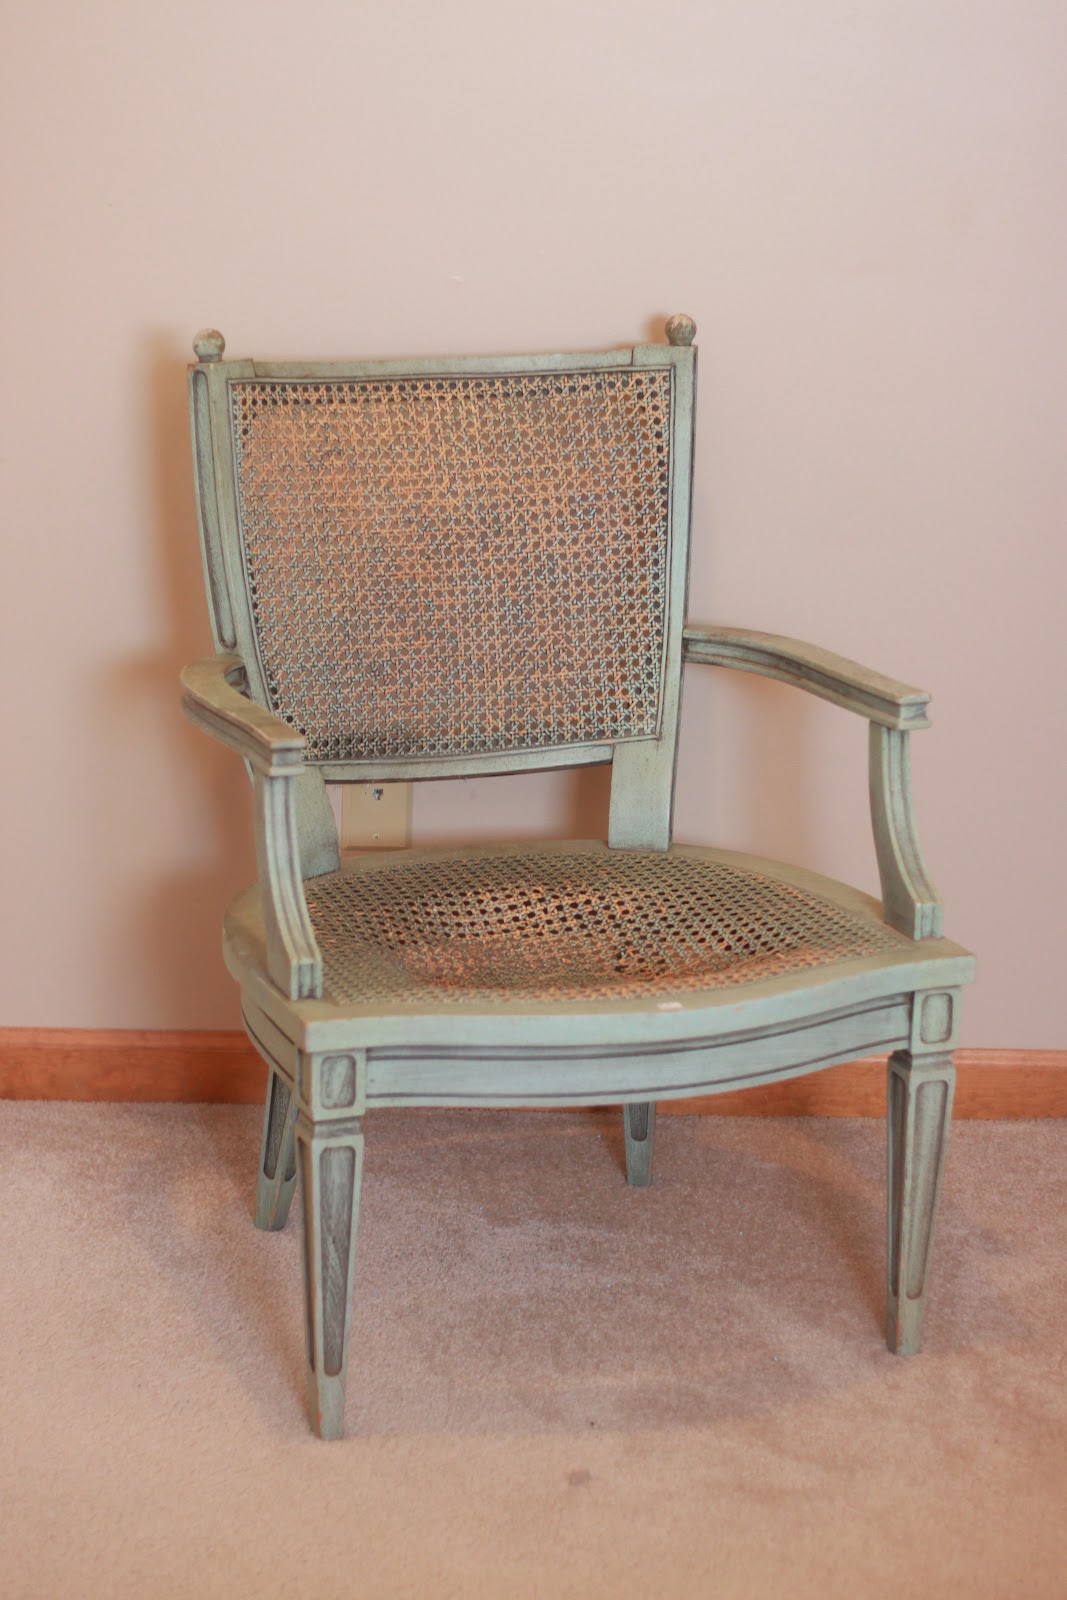 $5 Thrift Store Chair Makeover  Confessions of a Serial Do-it